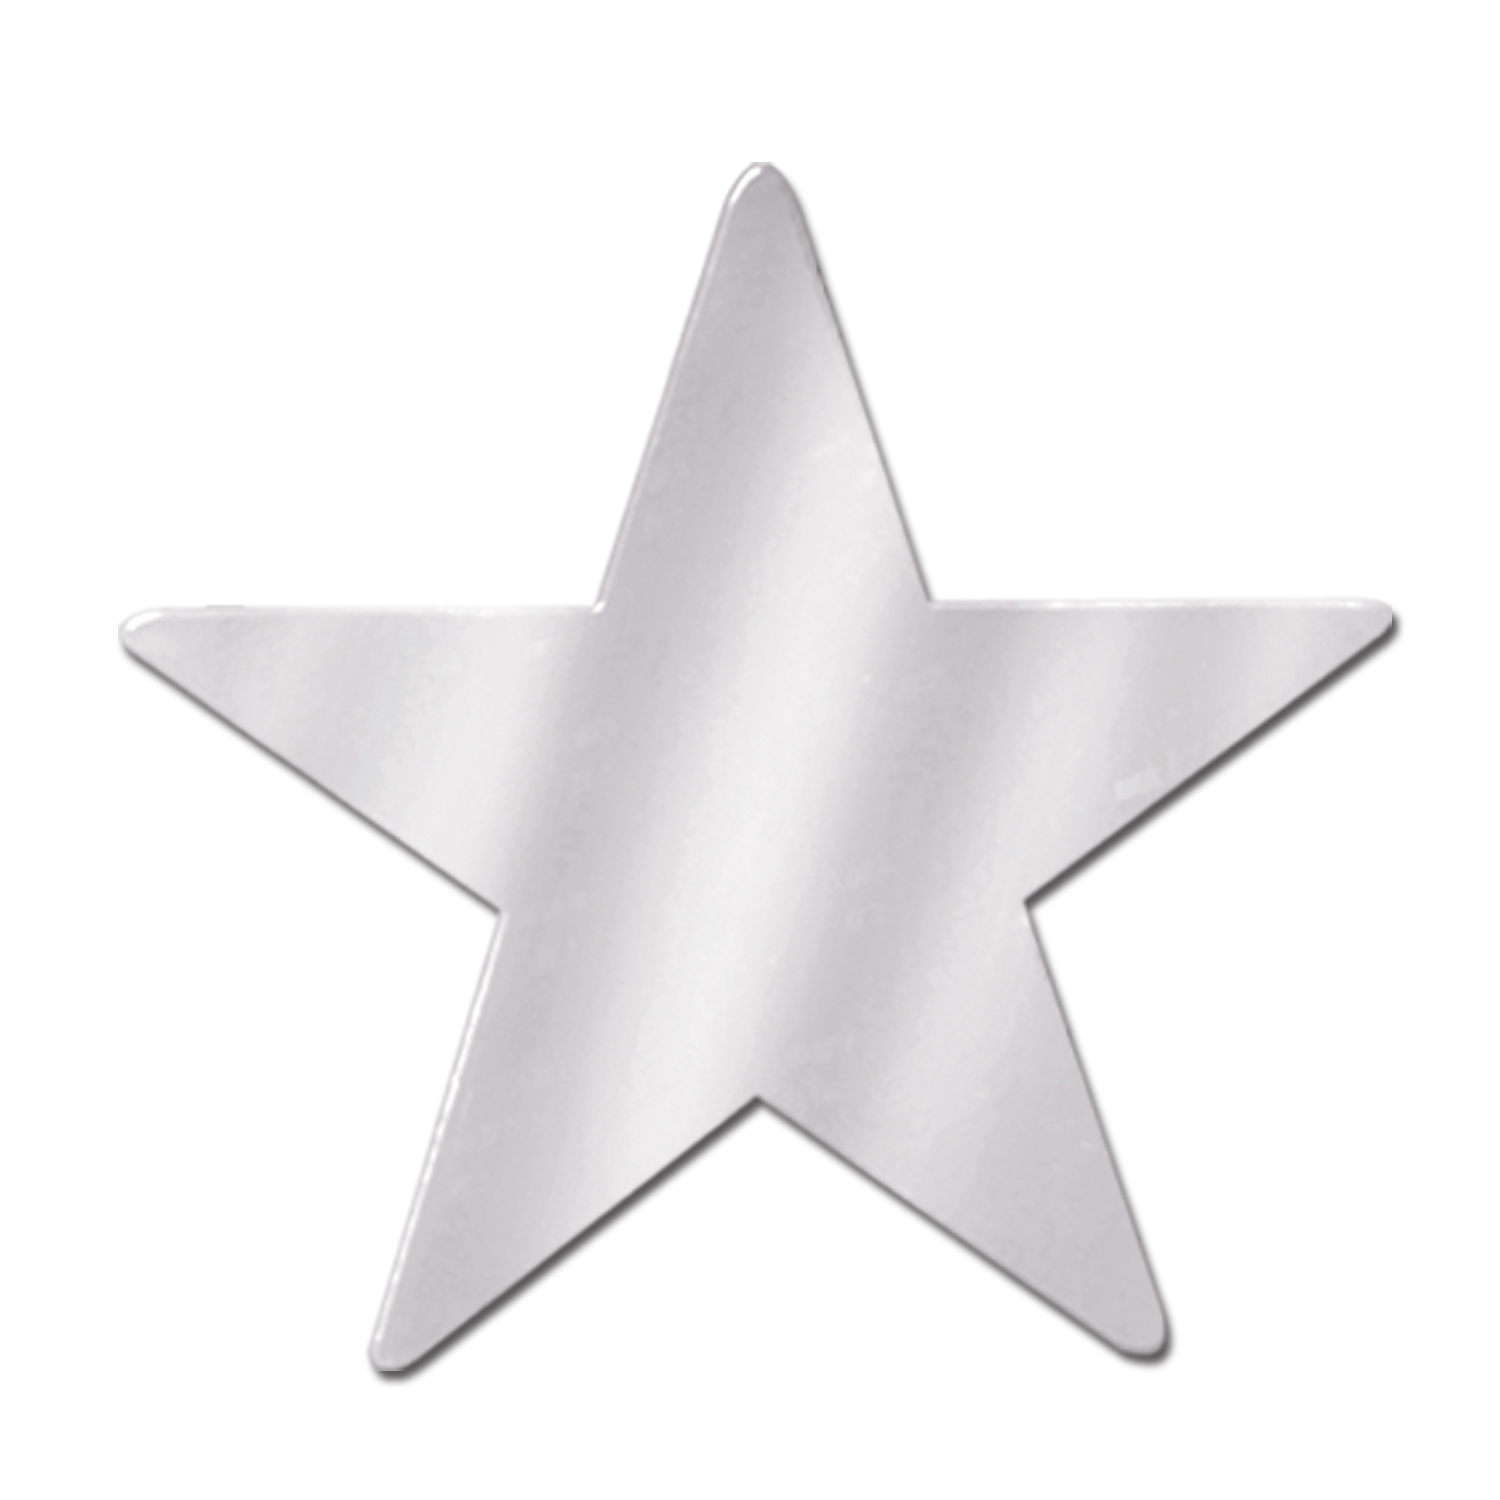 Star cutout decoration printed silver on card stock material.